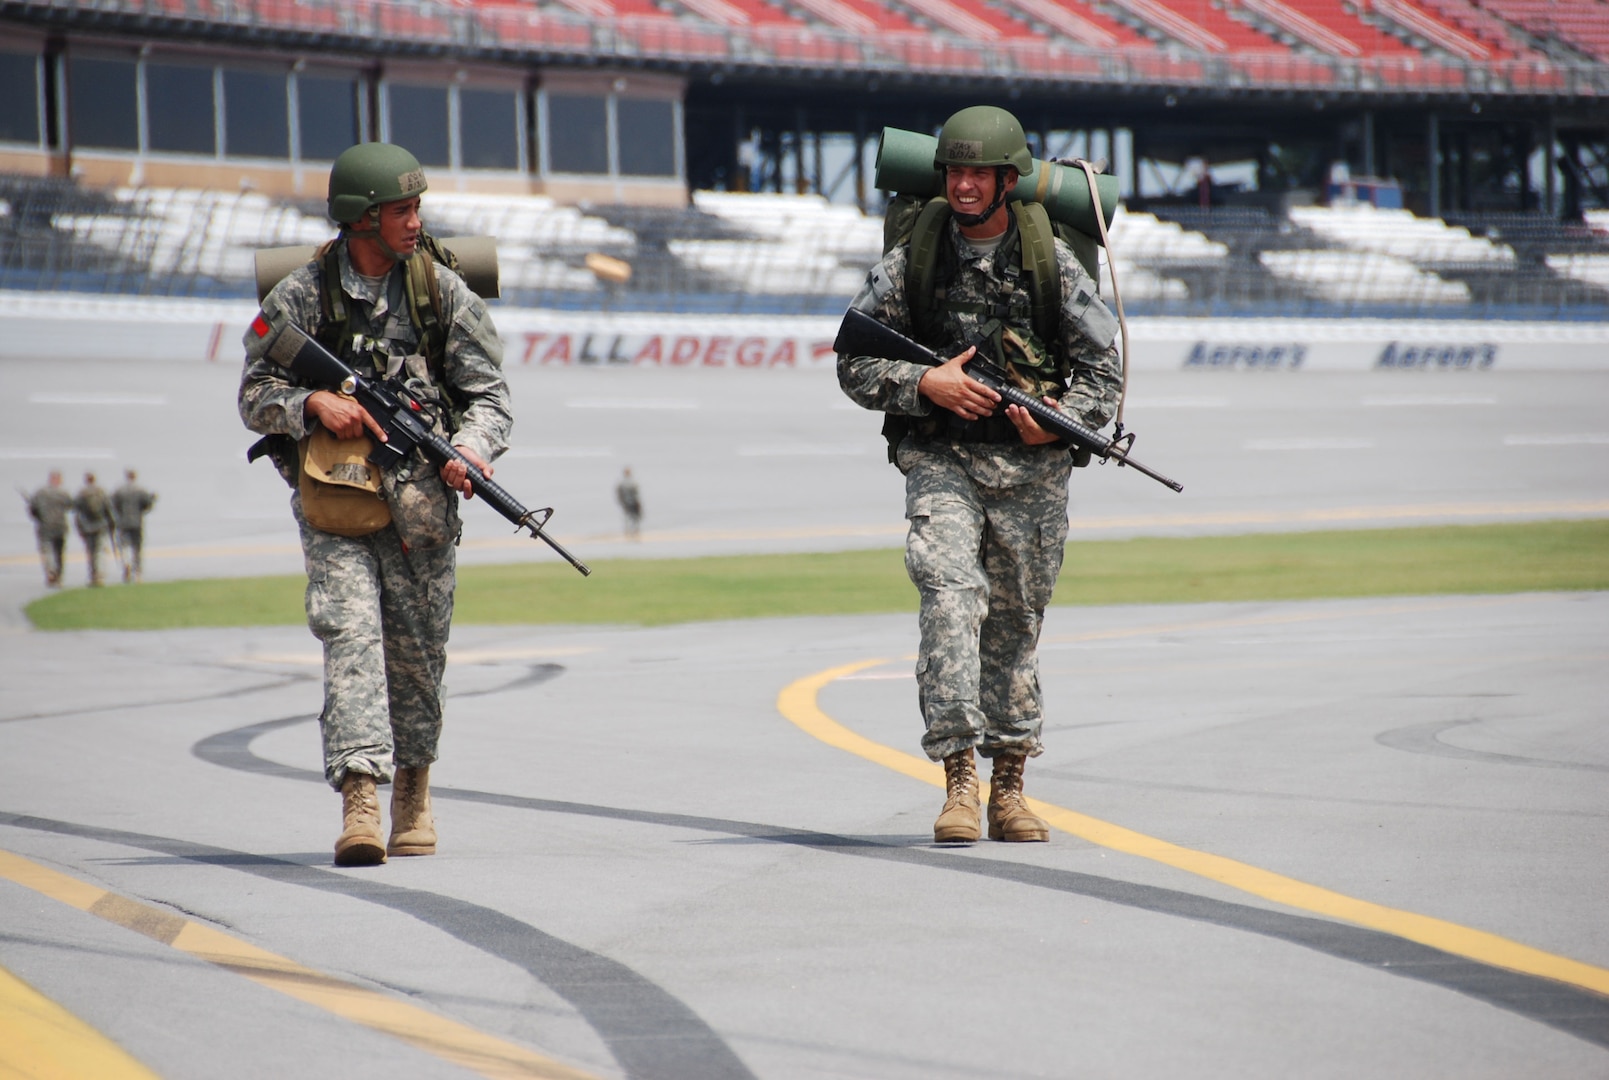 Eldwood Kaumeheiwa (left) from Georgia and Jason Garcia (right)from Alabama head for the finish line at Talladega Super Speedway. Kaumeheiwa and Garcia are among 173 officer candidates at the Alabama Military Academy's Officer Candidate School who completed a 7 mile road march that ended by completing one lap around the Speedway. One lap at the Speedway is approximately 2.6 miles. 